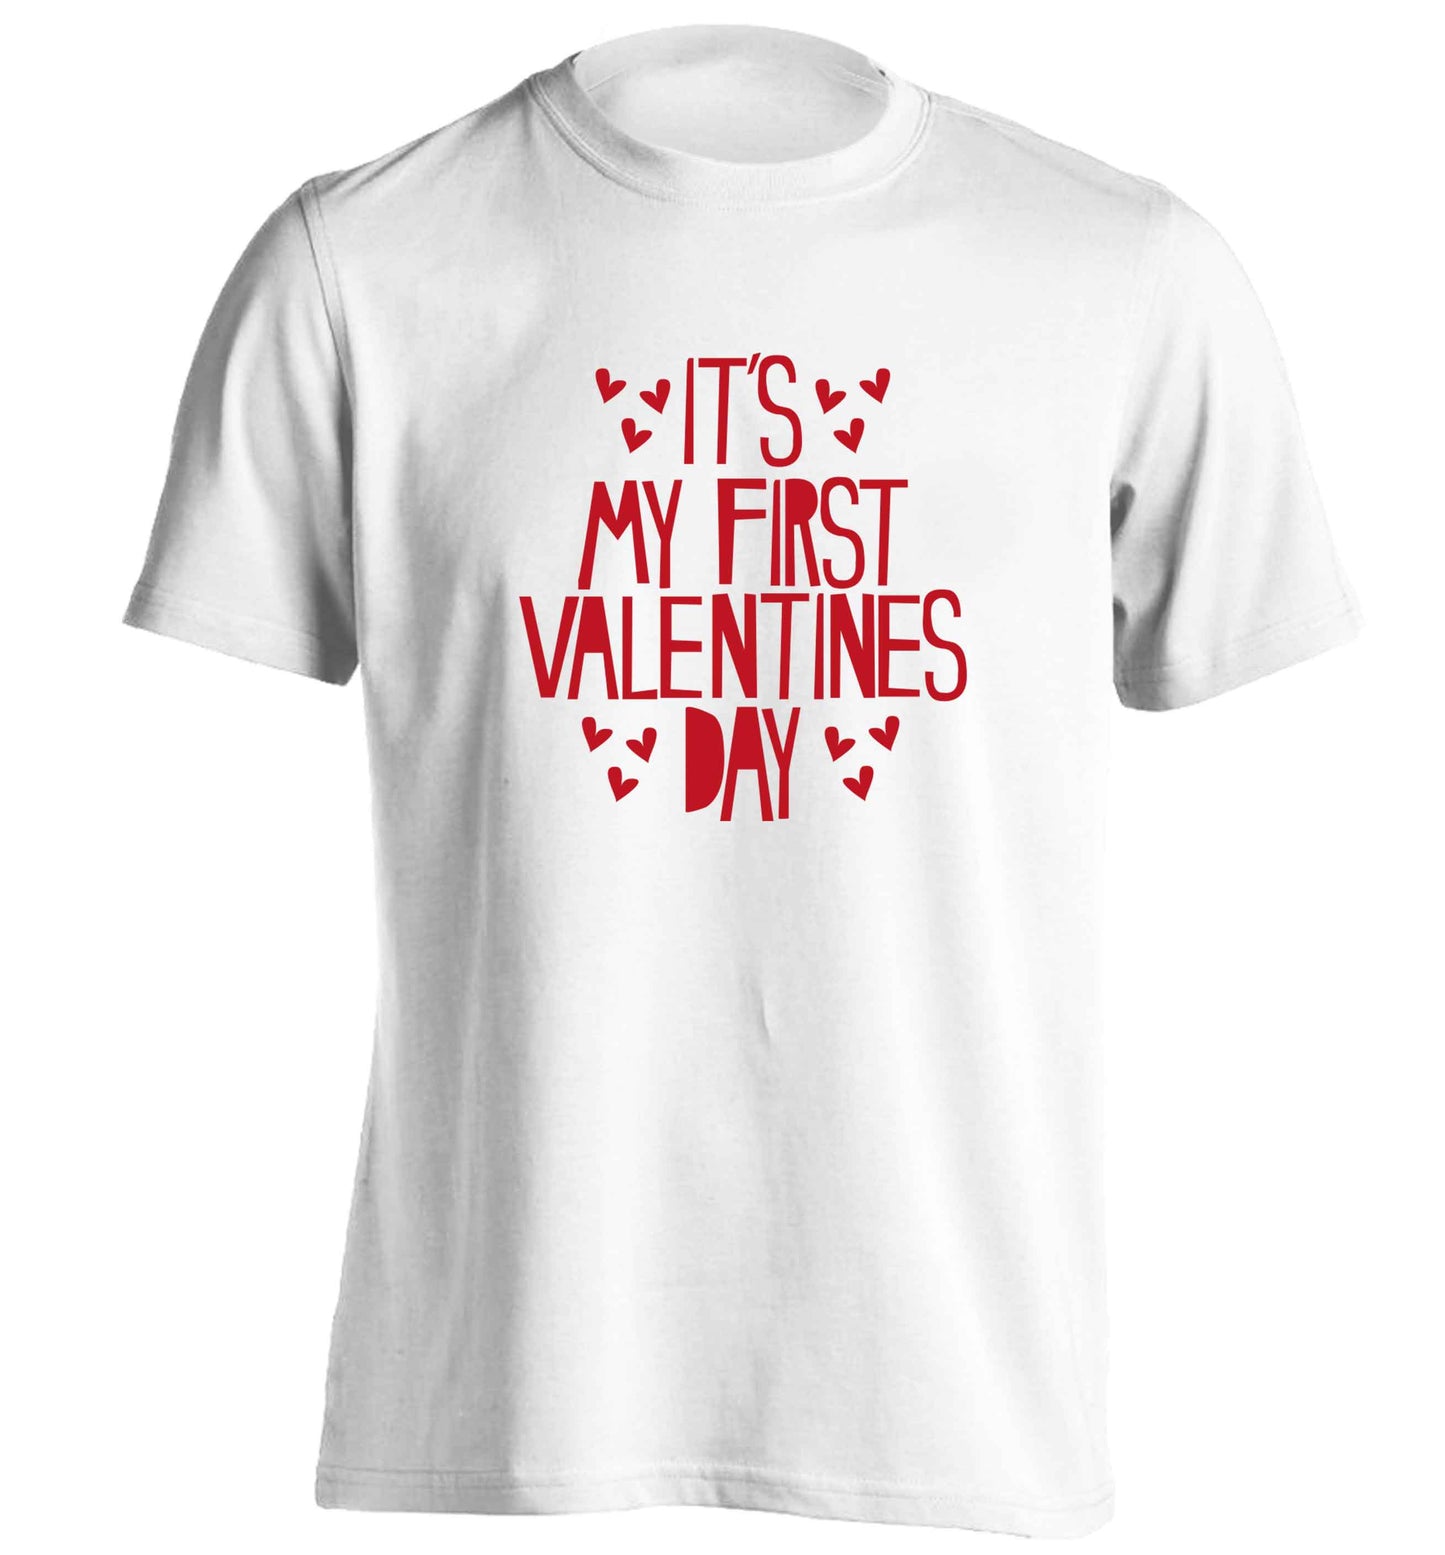 Hearts It's my First Valentine's Day adults unisex white Tshirt 2XL